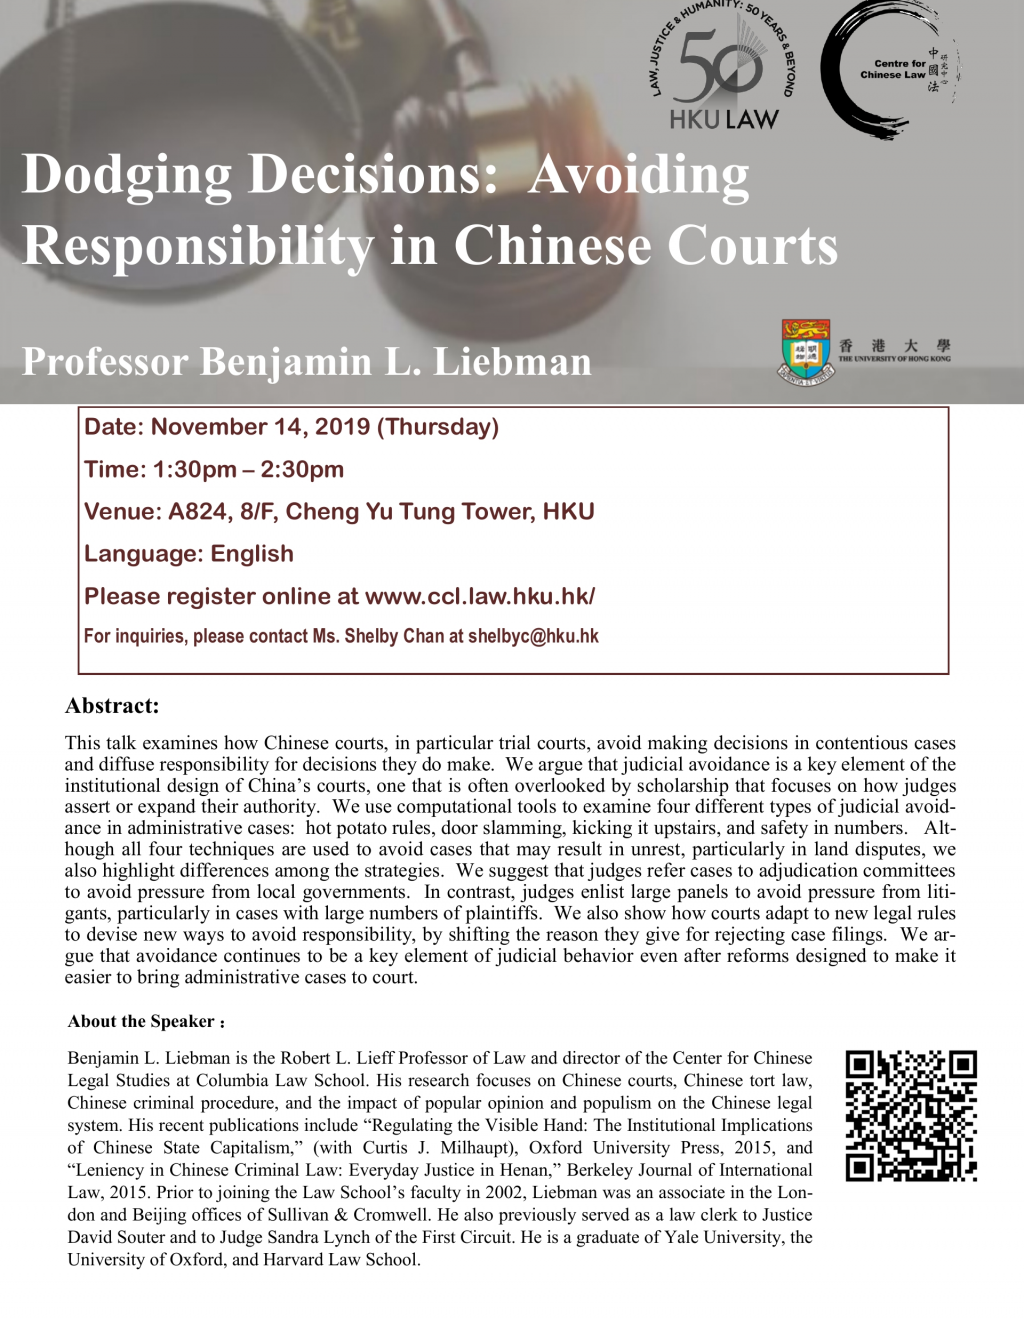 Dodging Decisions: Avoiding Responsibility in Chinese Courts